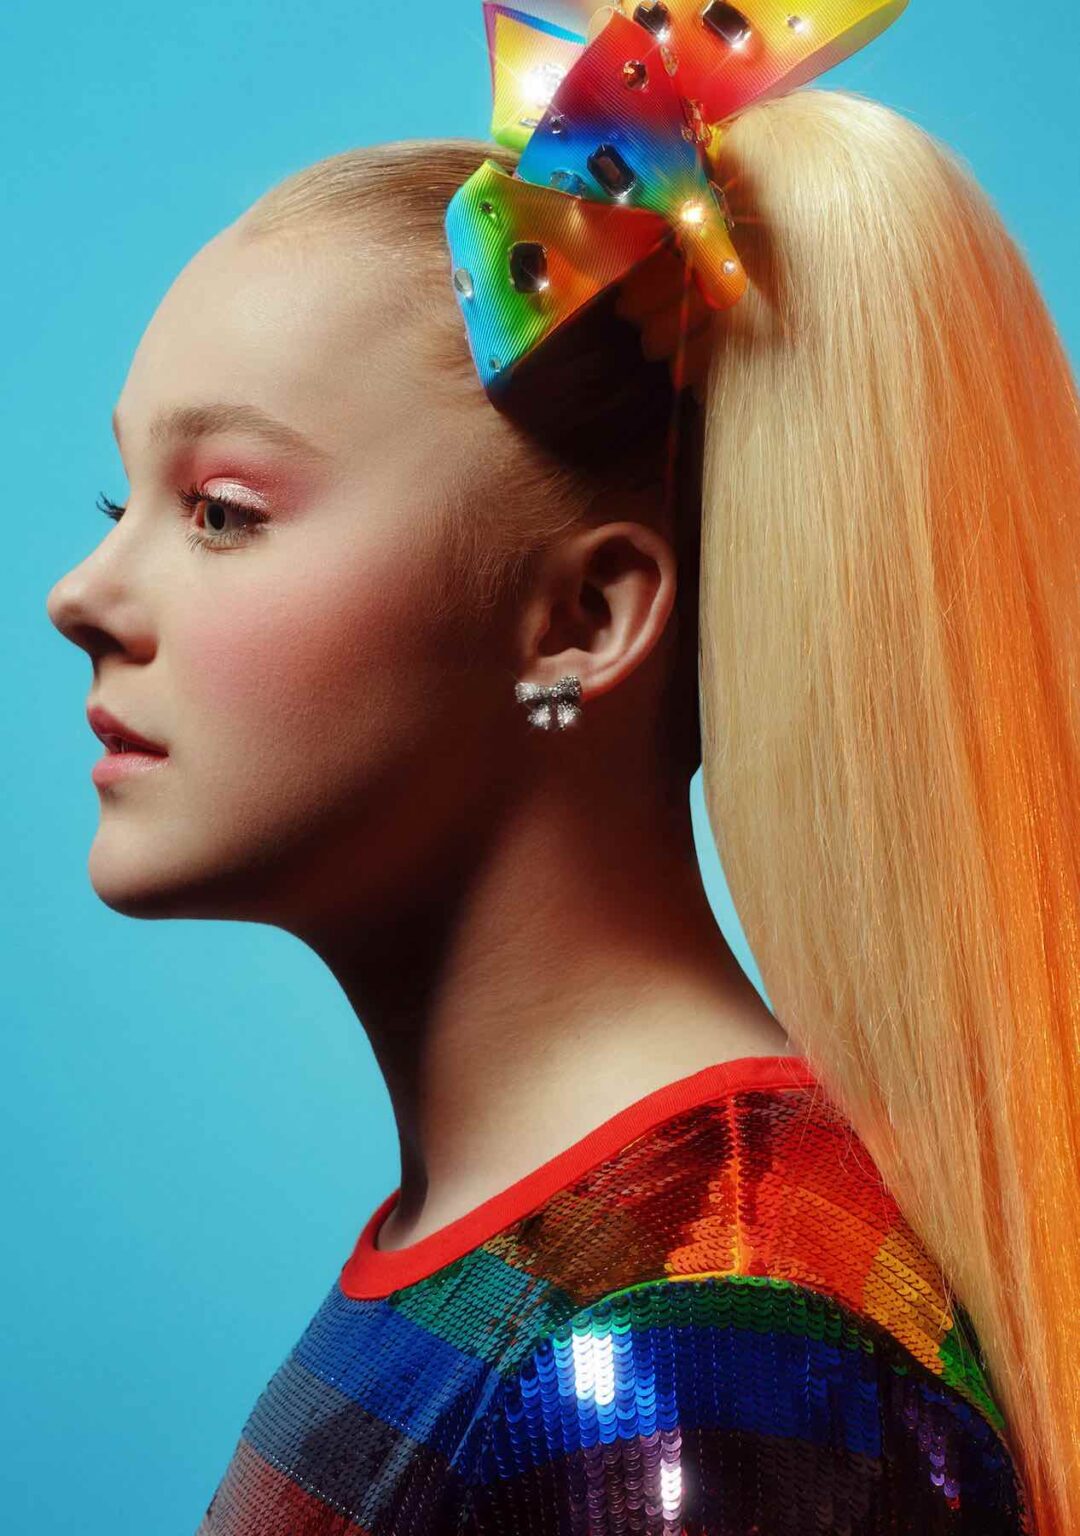 Former 'Dance Mom' star JoJo Siwa has recently shared on TikTok she’s gay, a proud member of the LGBTQ community. Let's dive in.